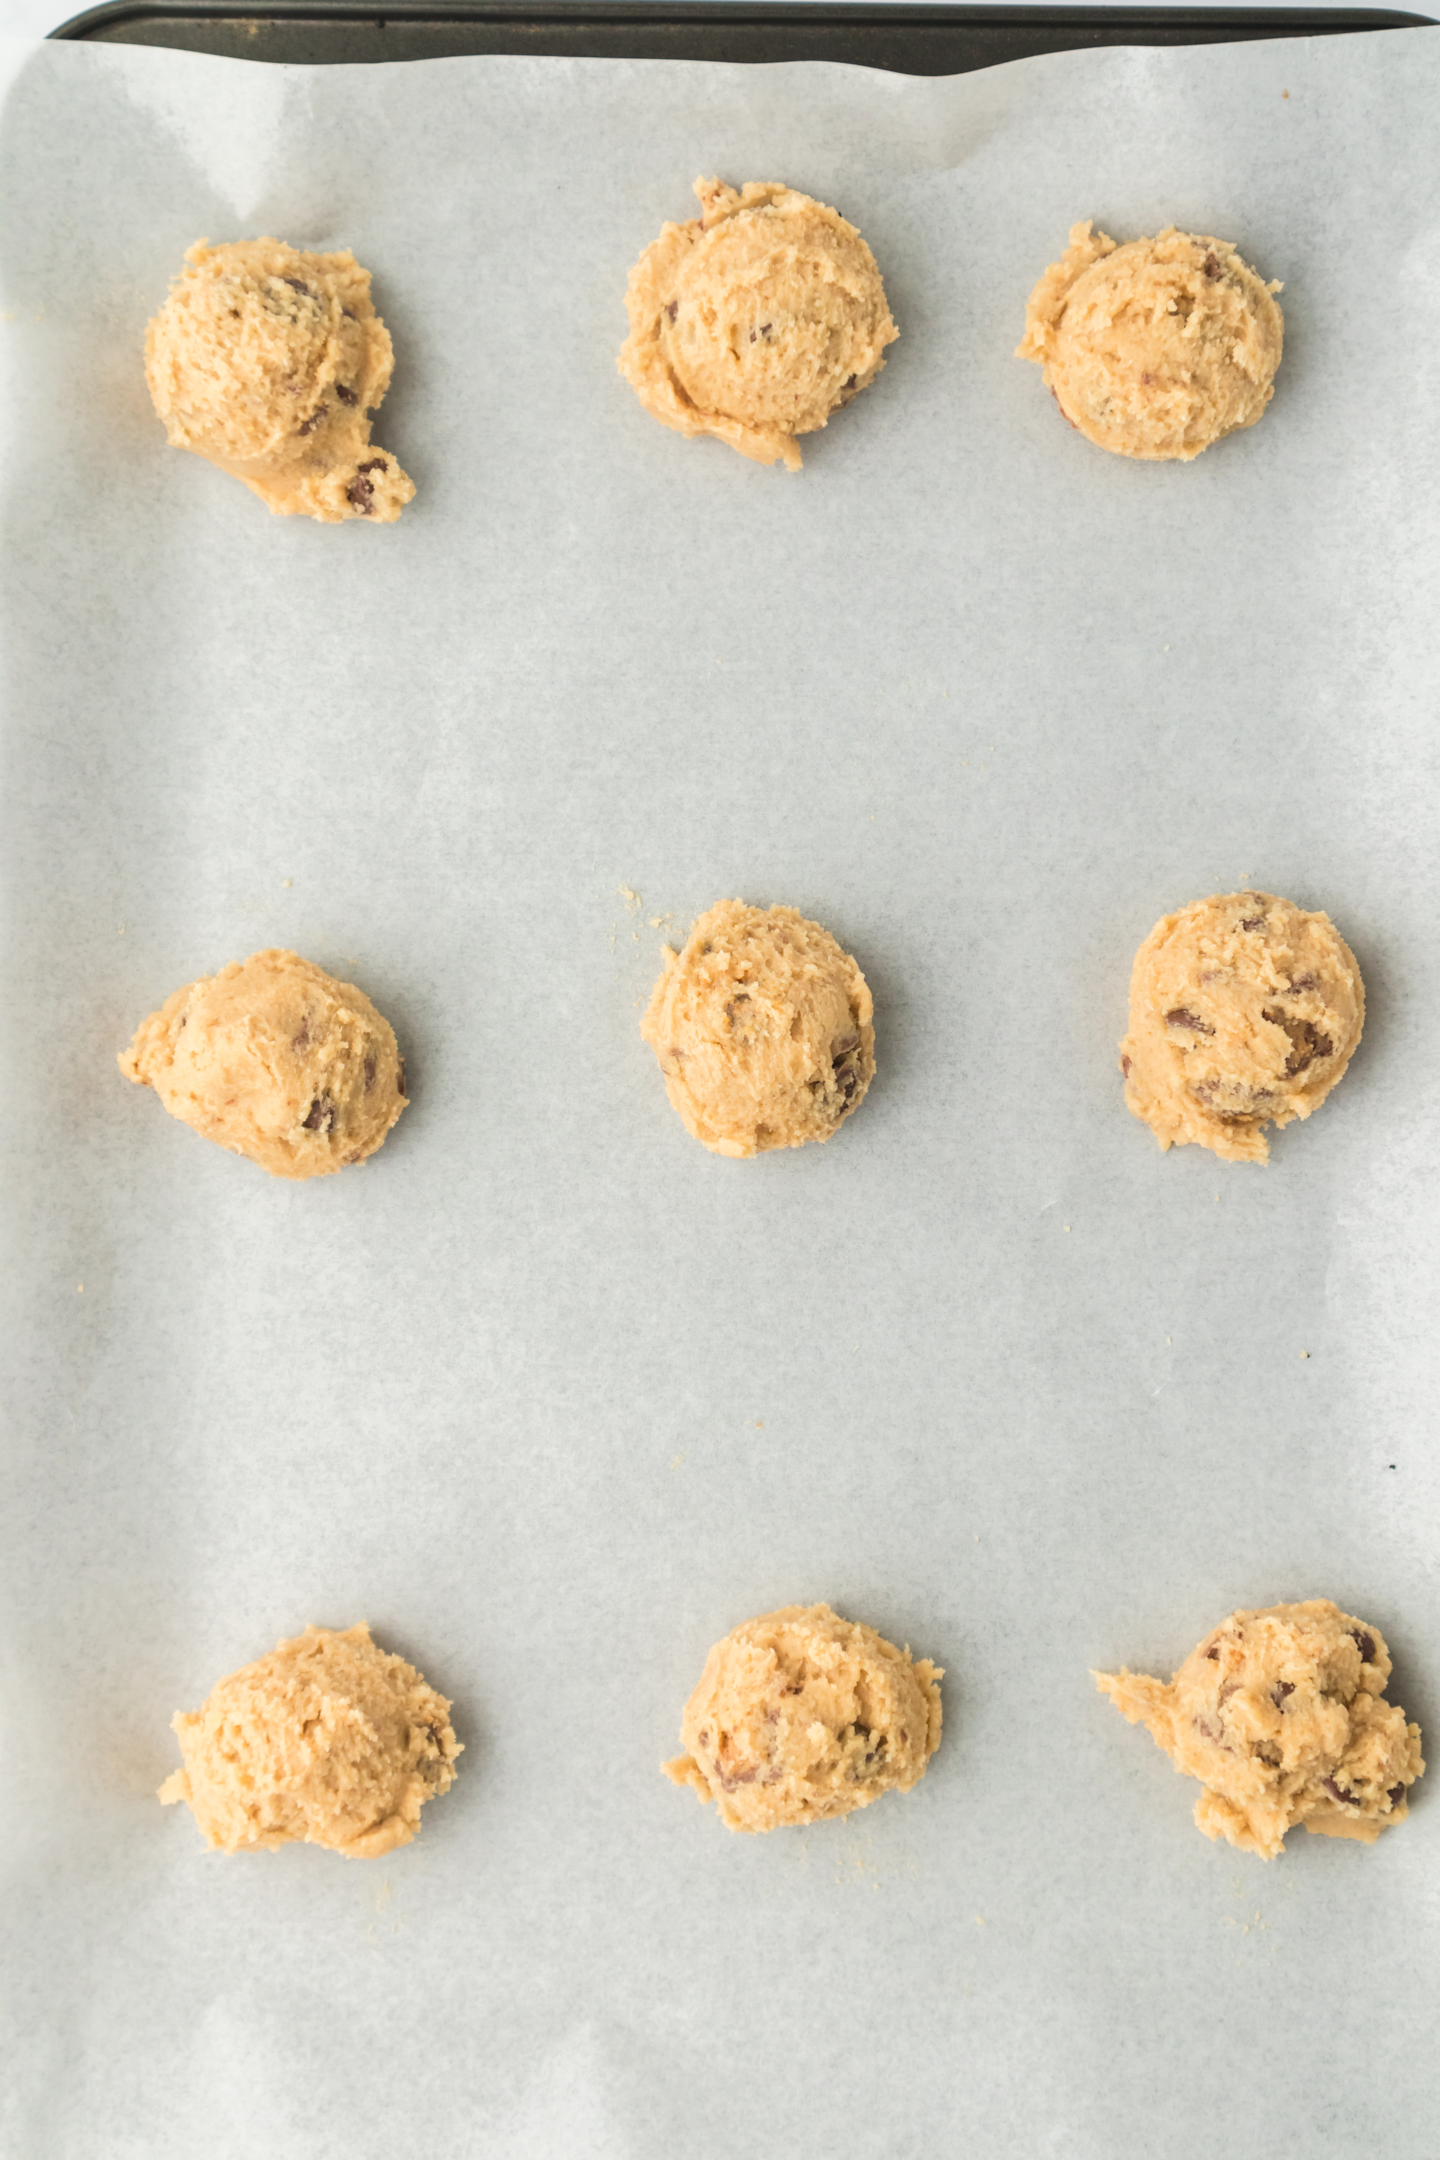 peanut butter cup cookie dough scooped and placed onto baking sheet